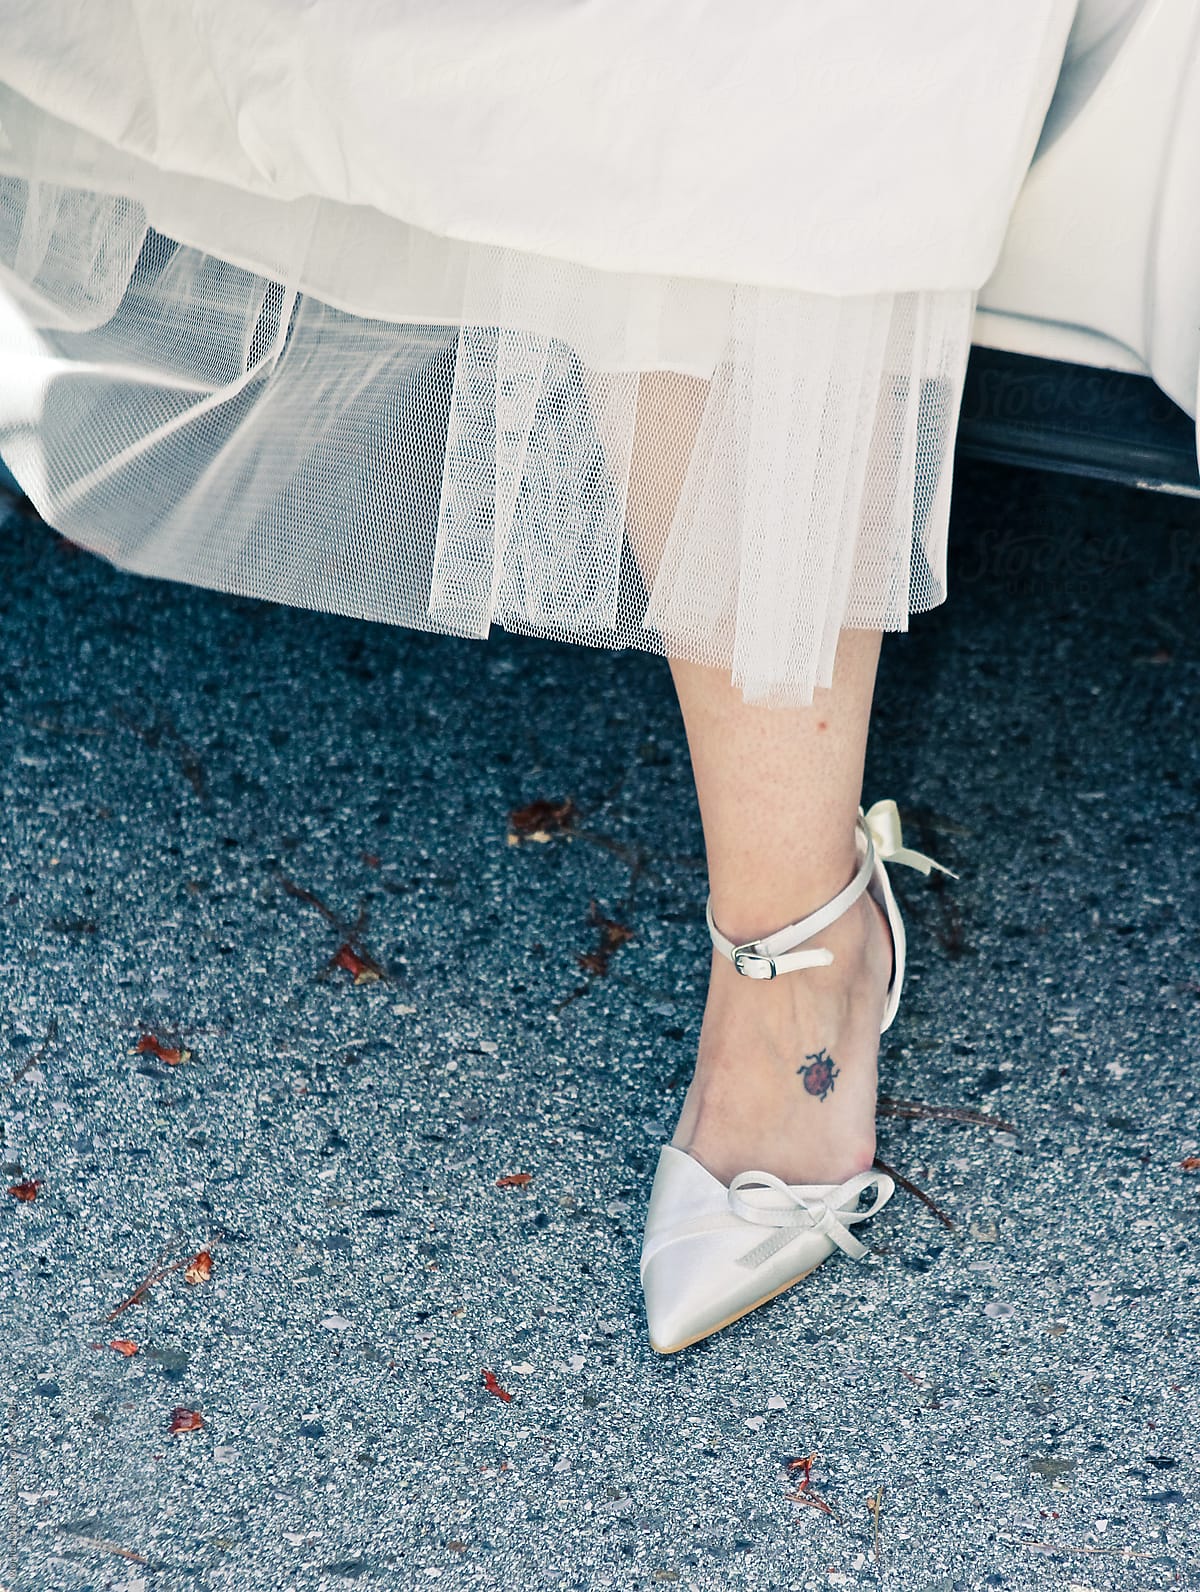 Bride stepping out of limo, focus on lower part of her dress and shoe